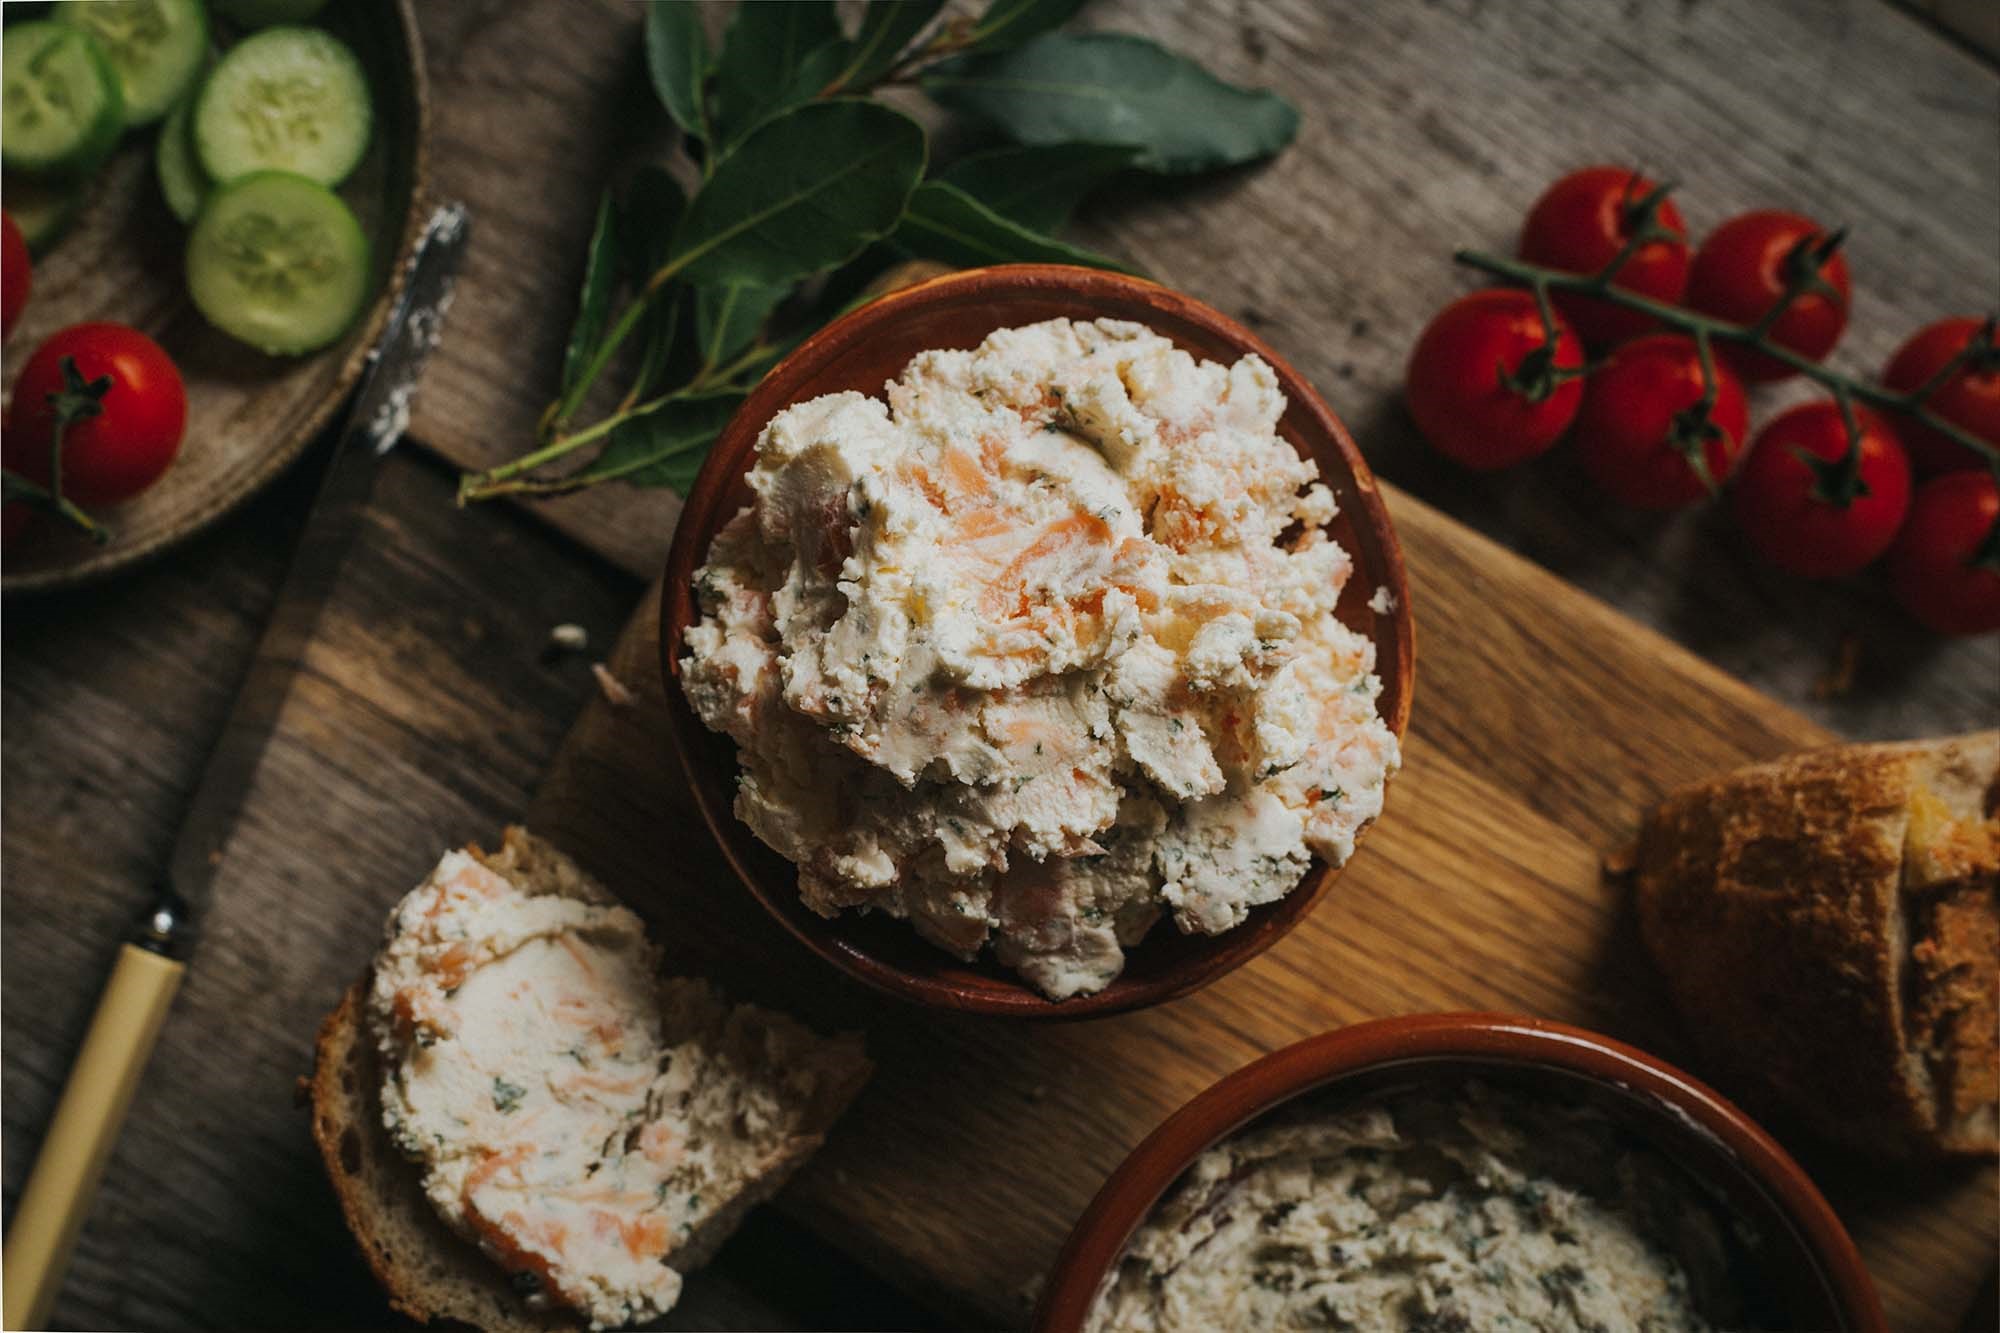 Smoked Trout Pate